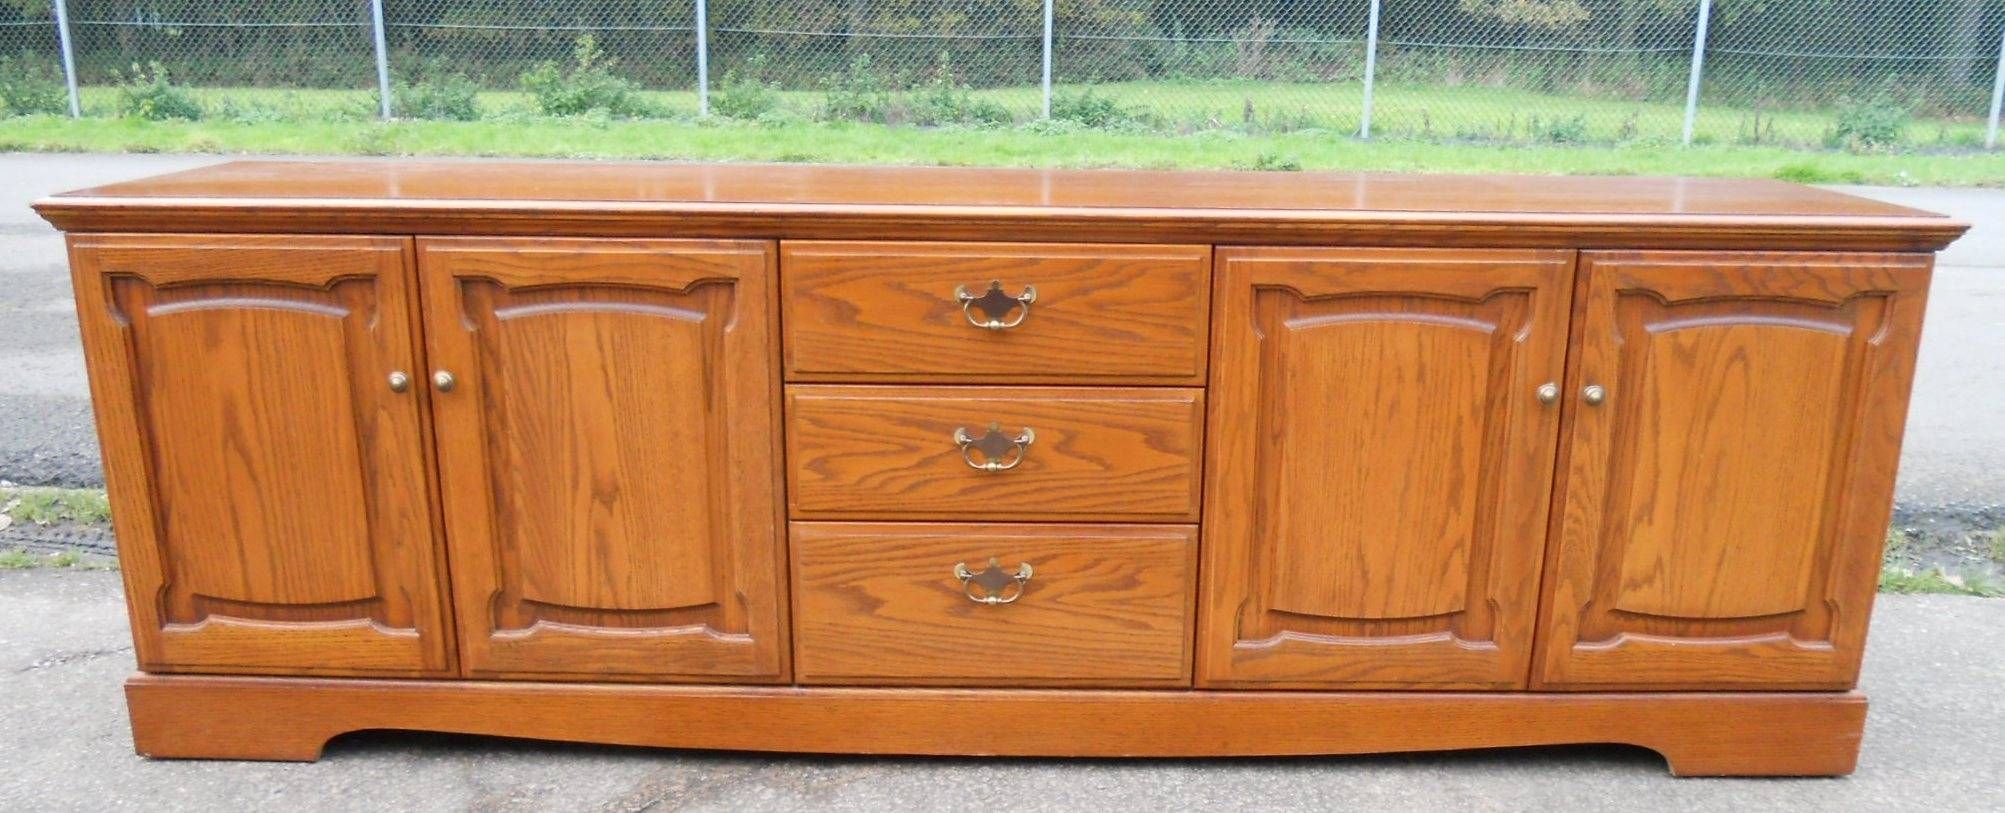 Long Low Oak Sideboard Cupboard Basewilliam Laurence – Sold With Long Sideboards (View 13 of 15)